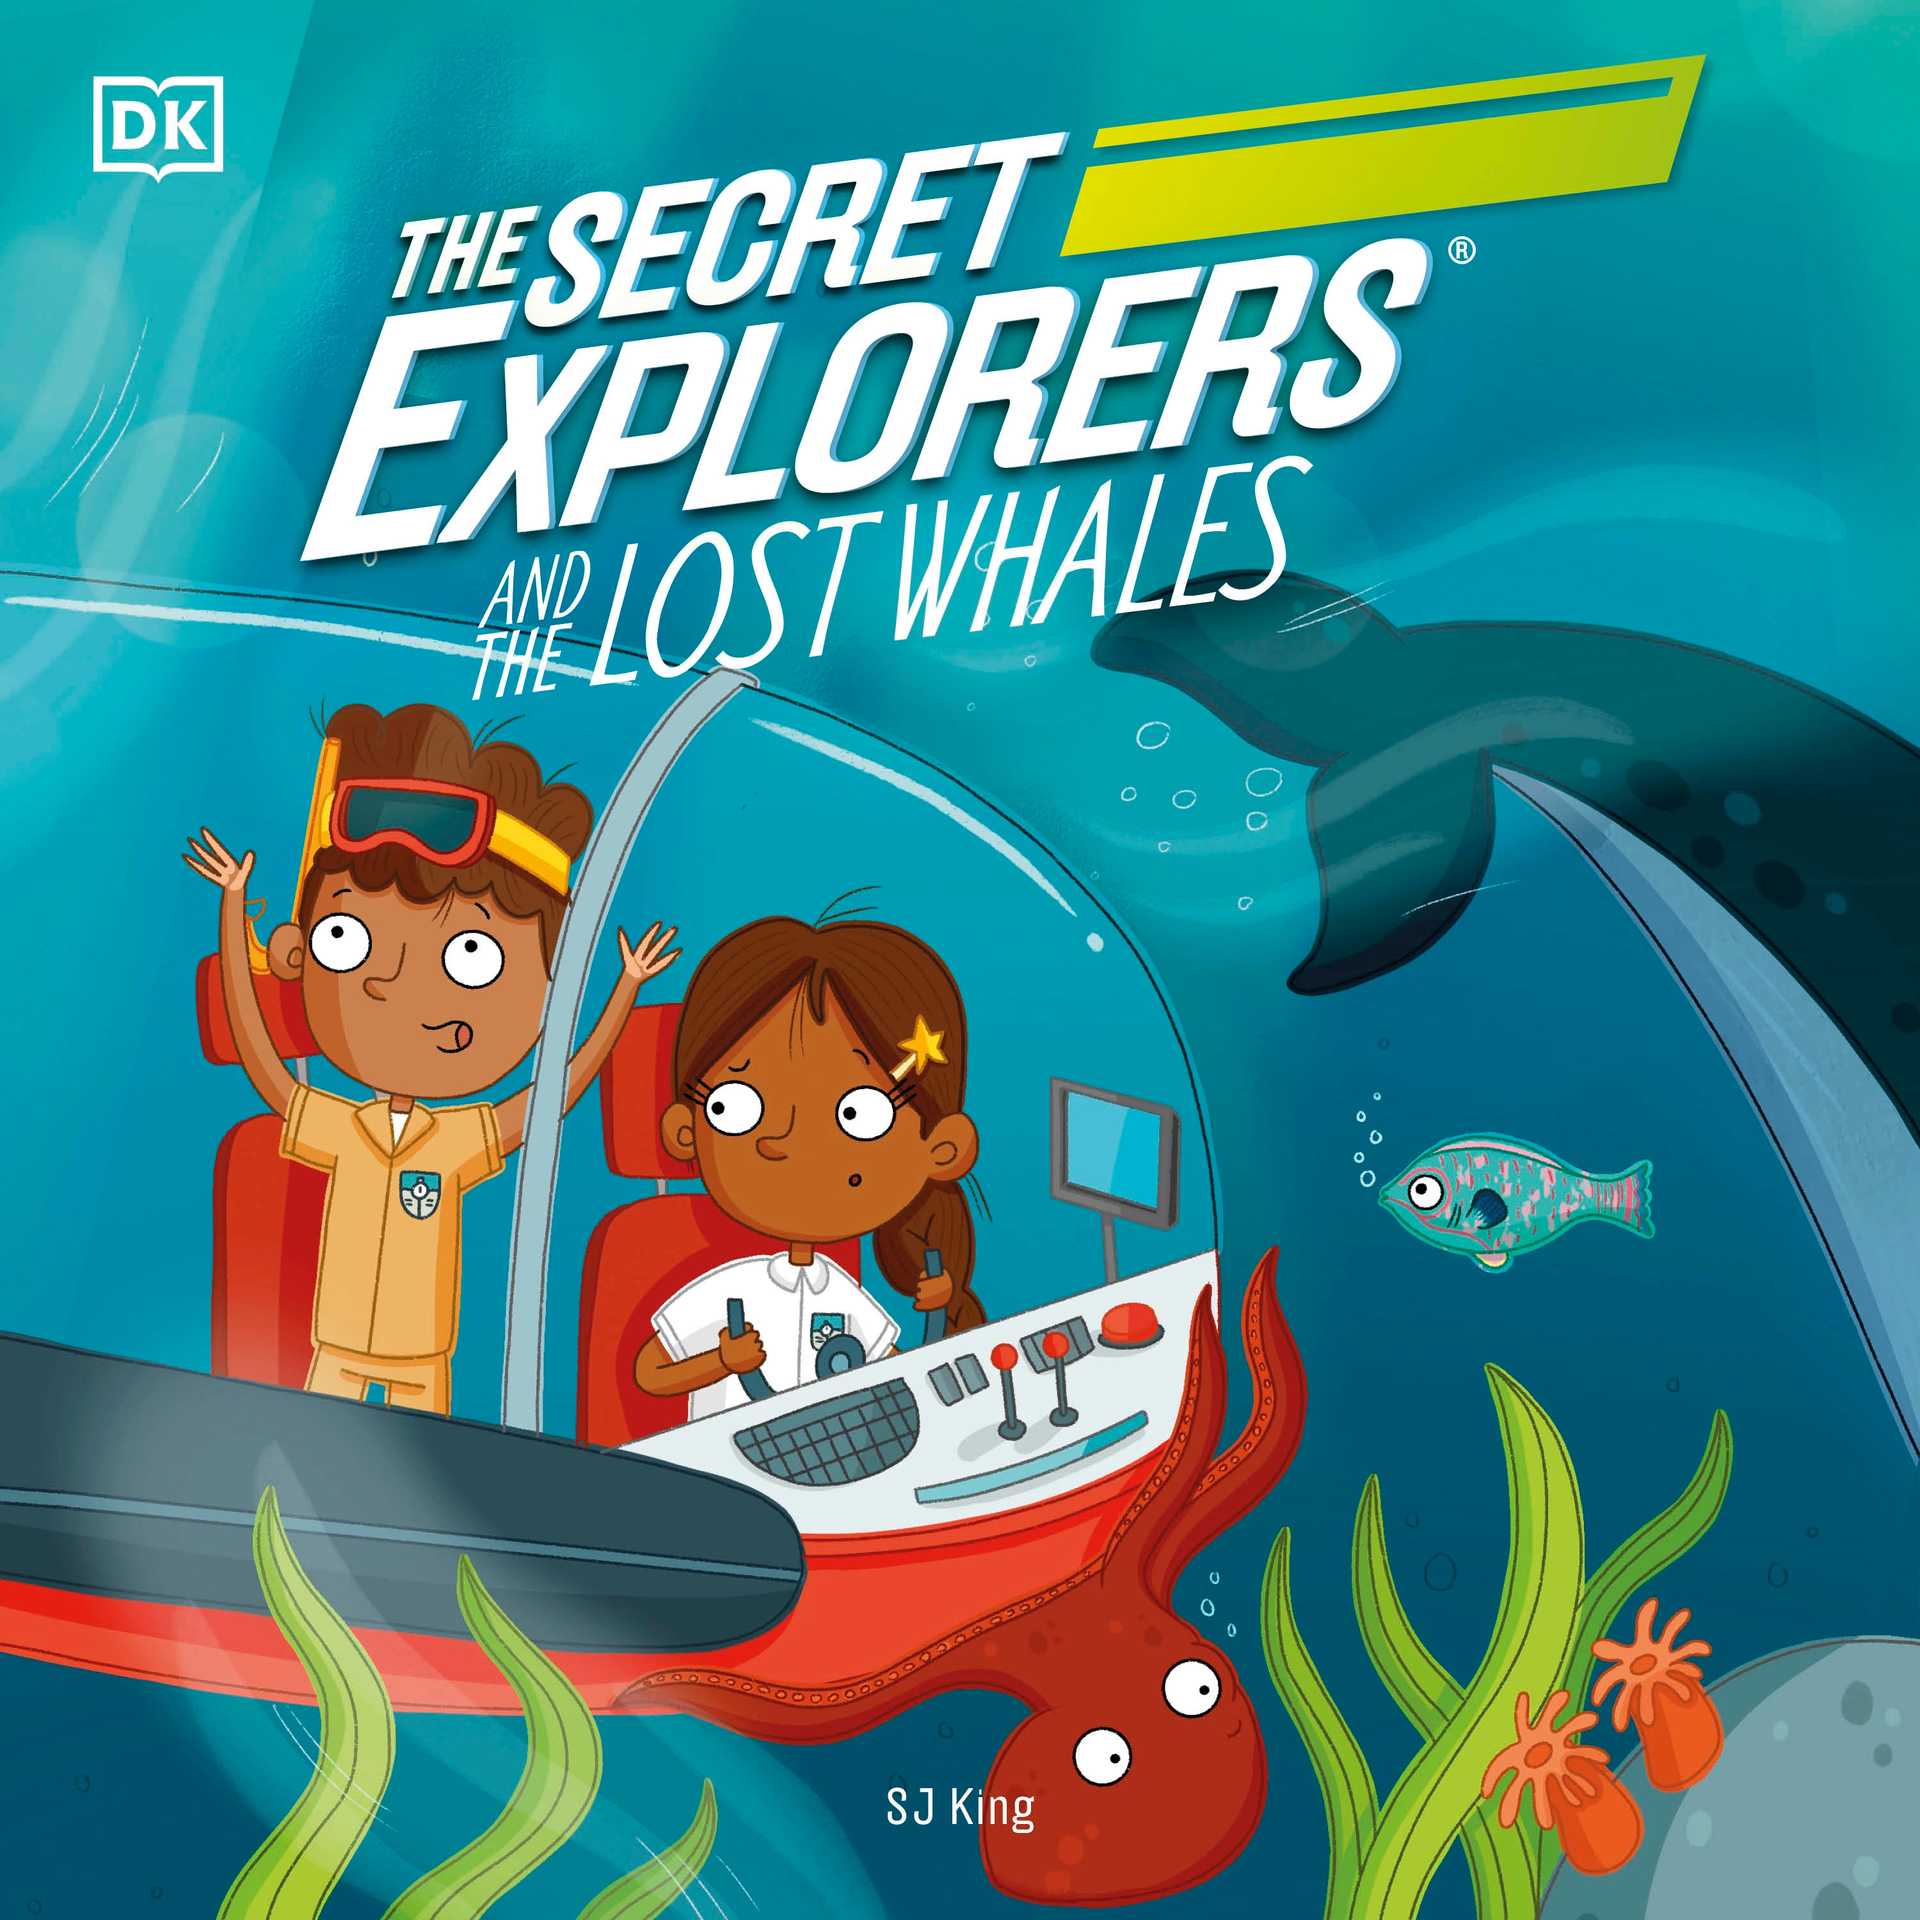 The Secret Explorers and the Lost Whales, by DK